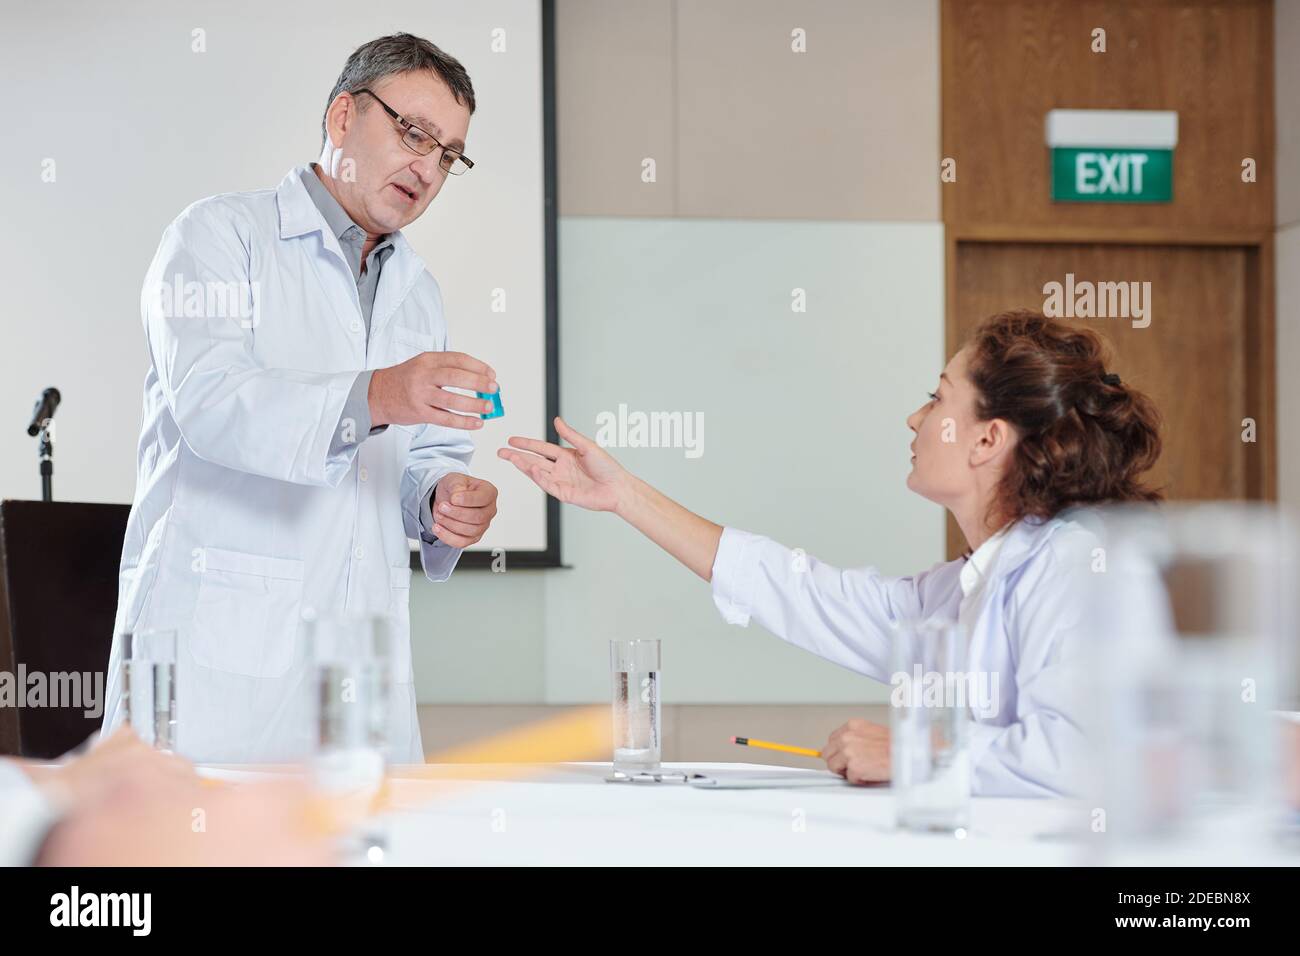 Scientist giving vaccine to colleague Stock Photo